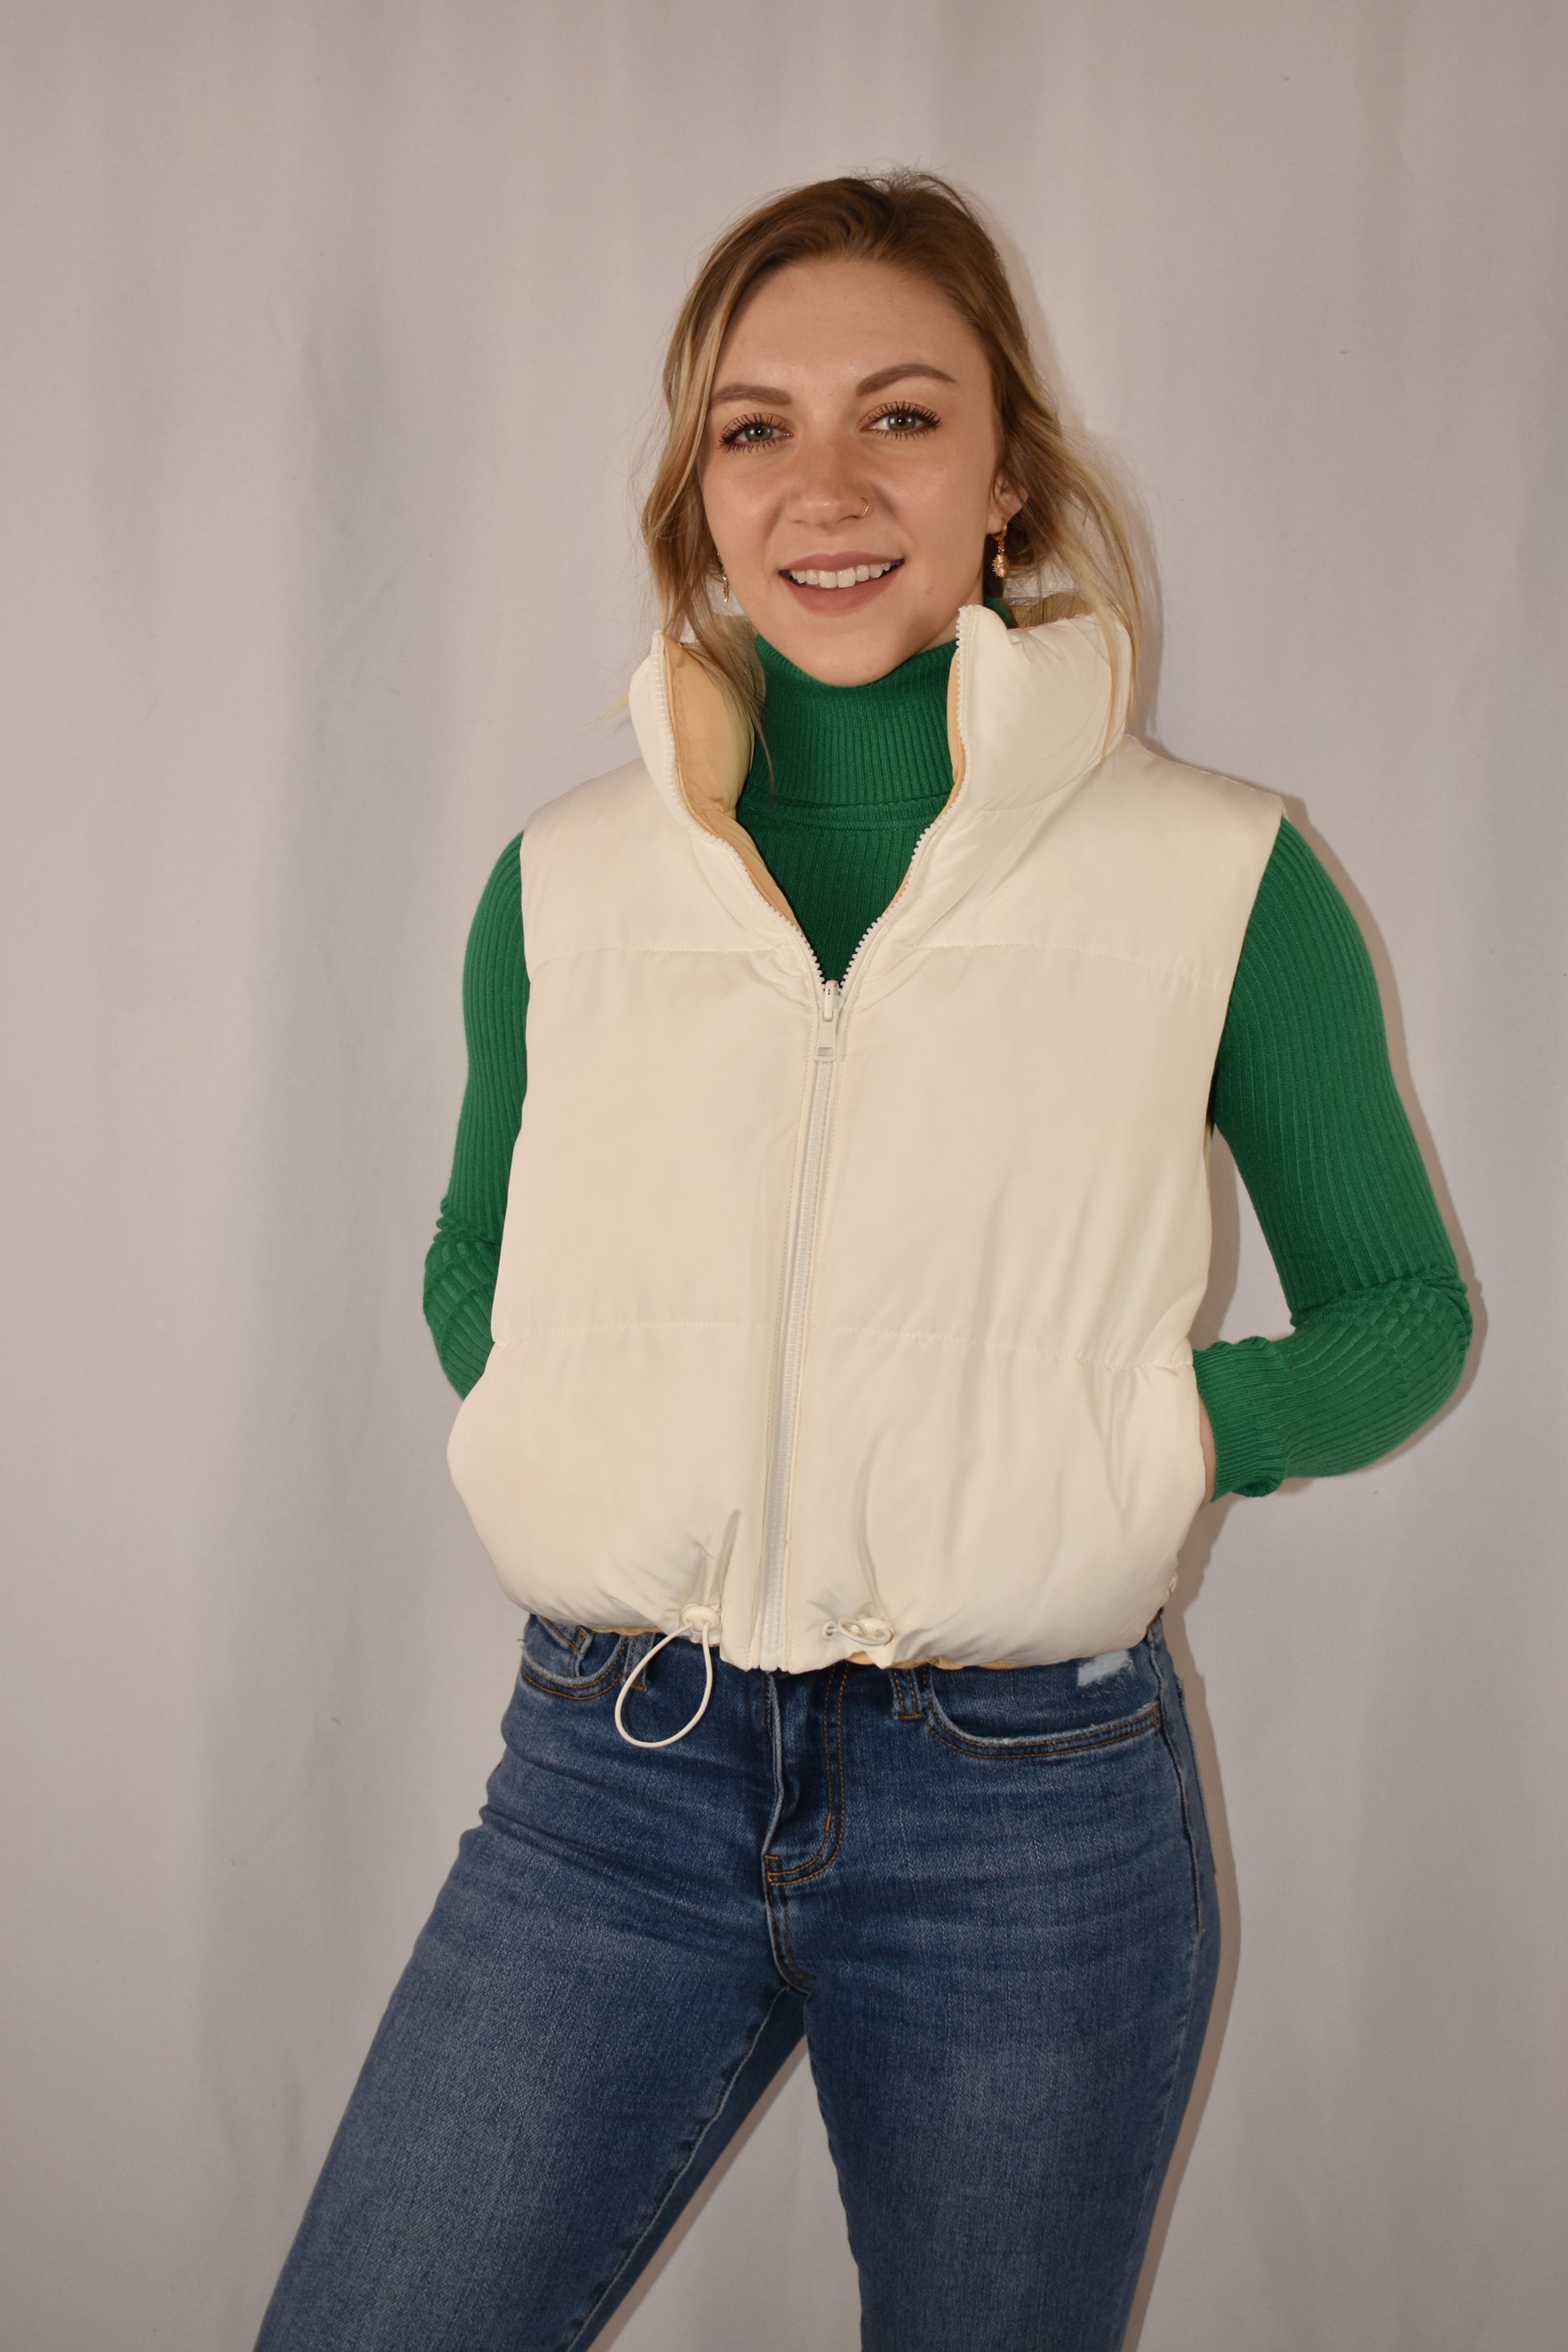 reversible waist length puffer vest with collar, zip front, side pockets, and draw string at bottom.